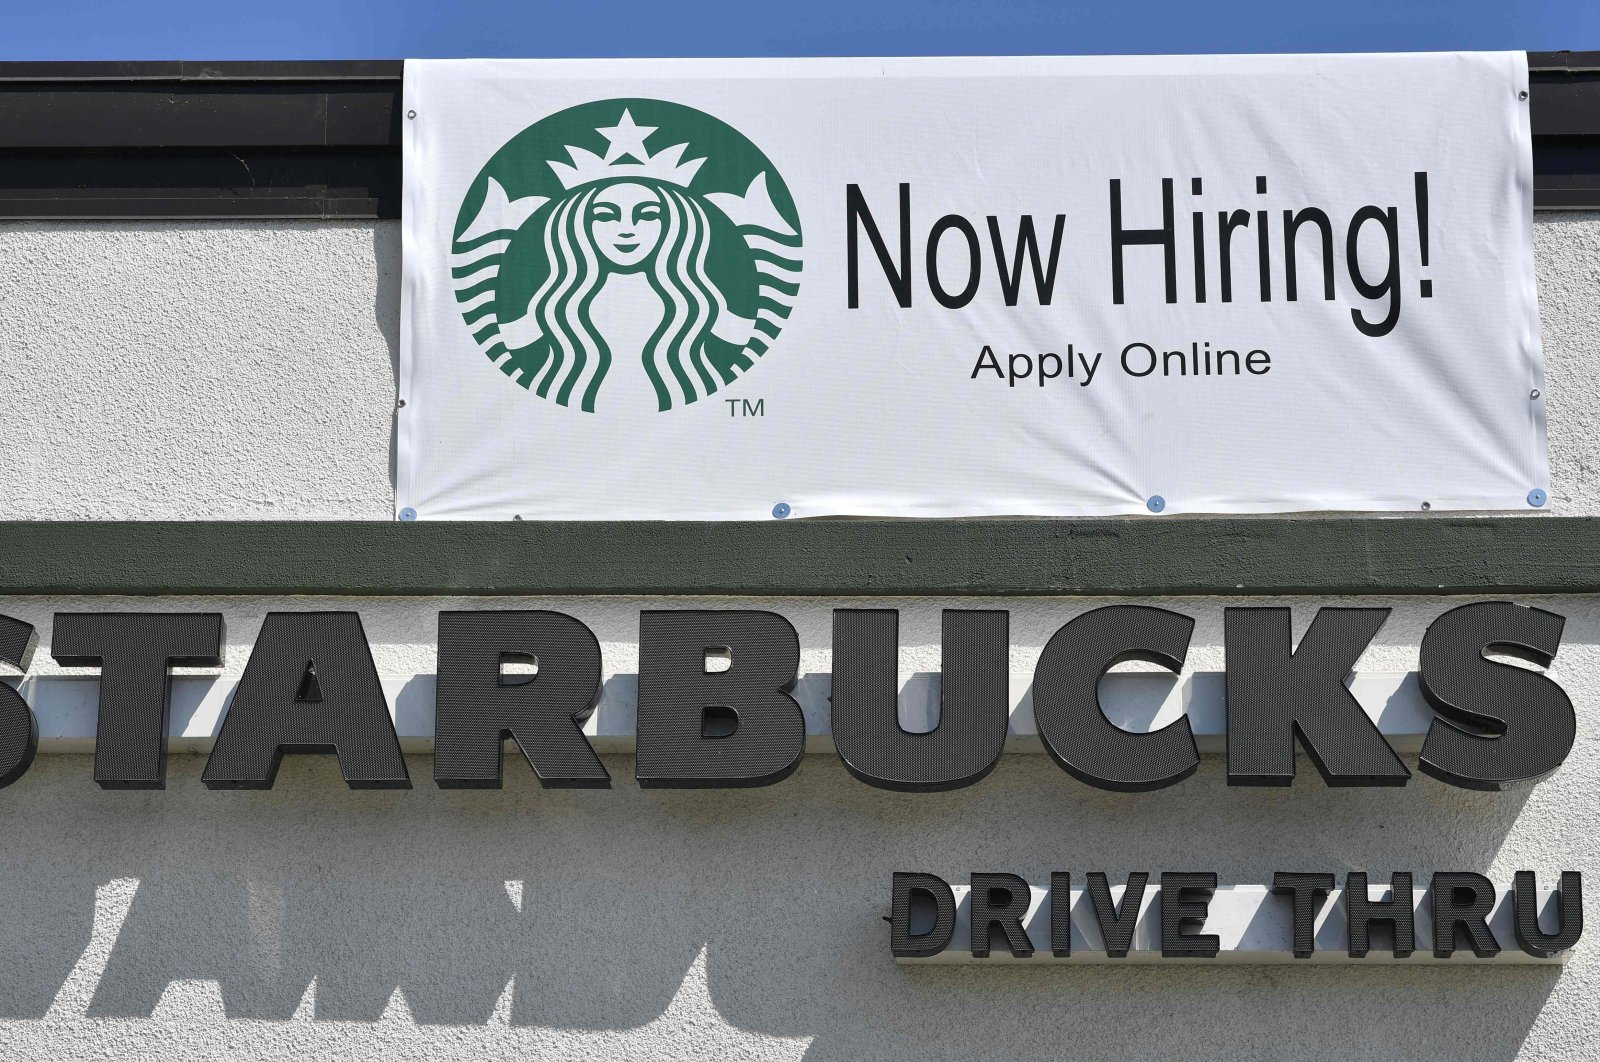 A "Now Hiring" sign is displayed outside a Starbucks coffee shop in Glendale, California, US, July 7, 2021. (AFP Photo)